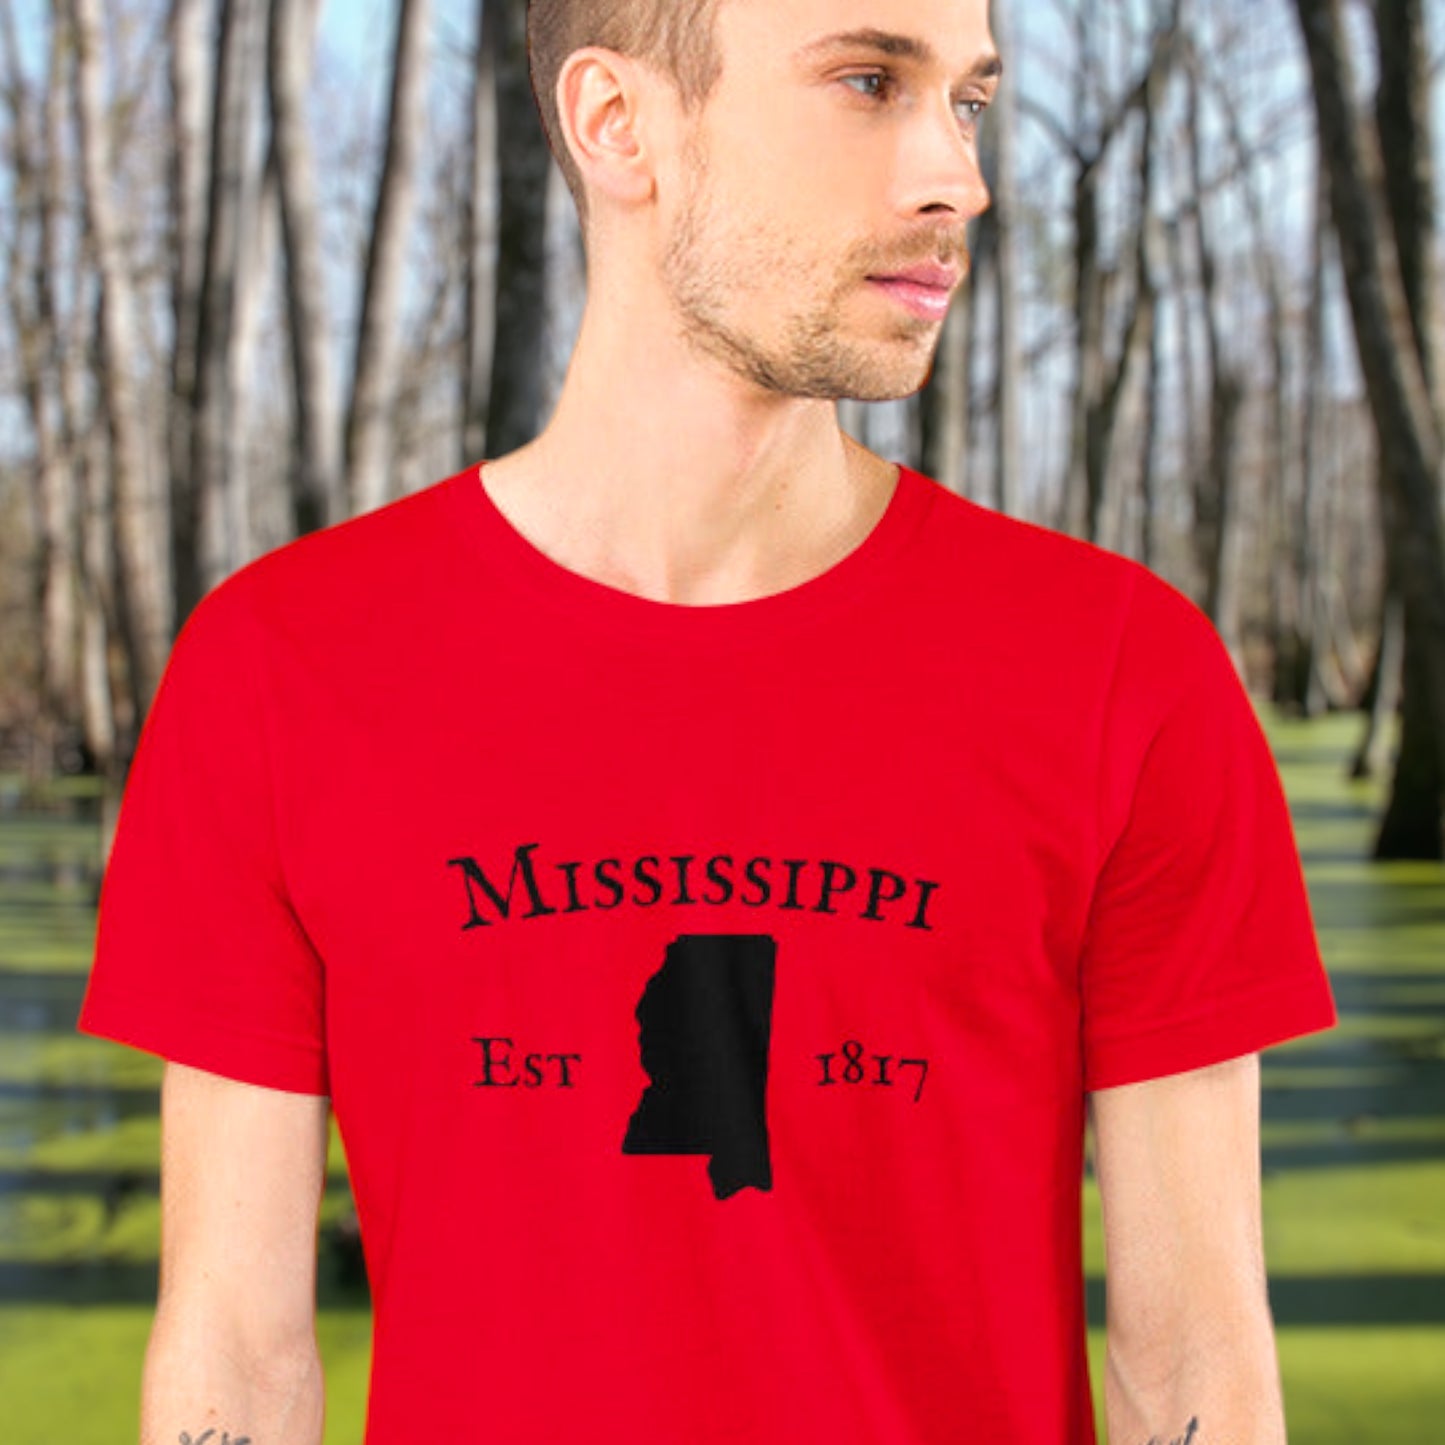 "Mississippi Established In 1817" T-Shirt - Weave Got Gifts - Unique Gifts You Won’t Find Anywhere Else!